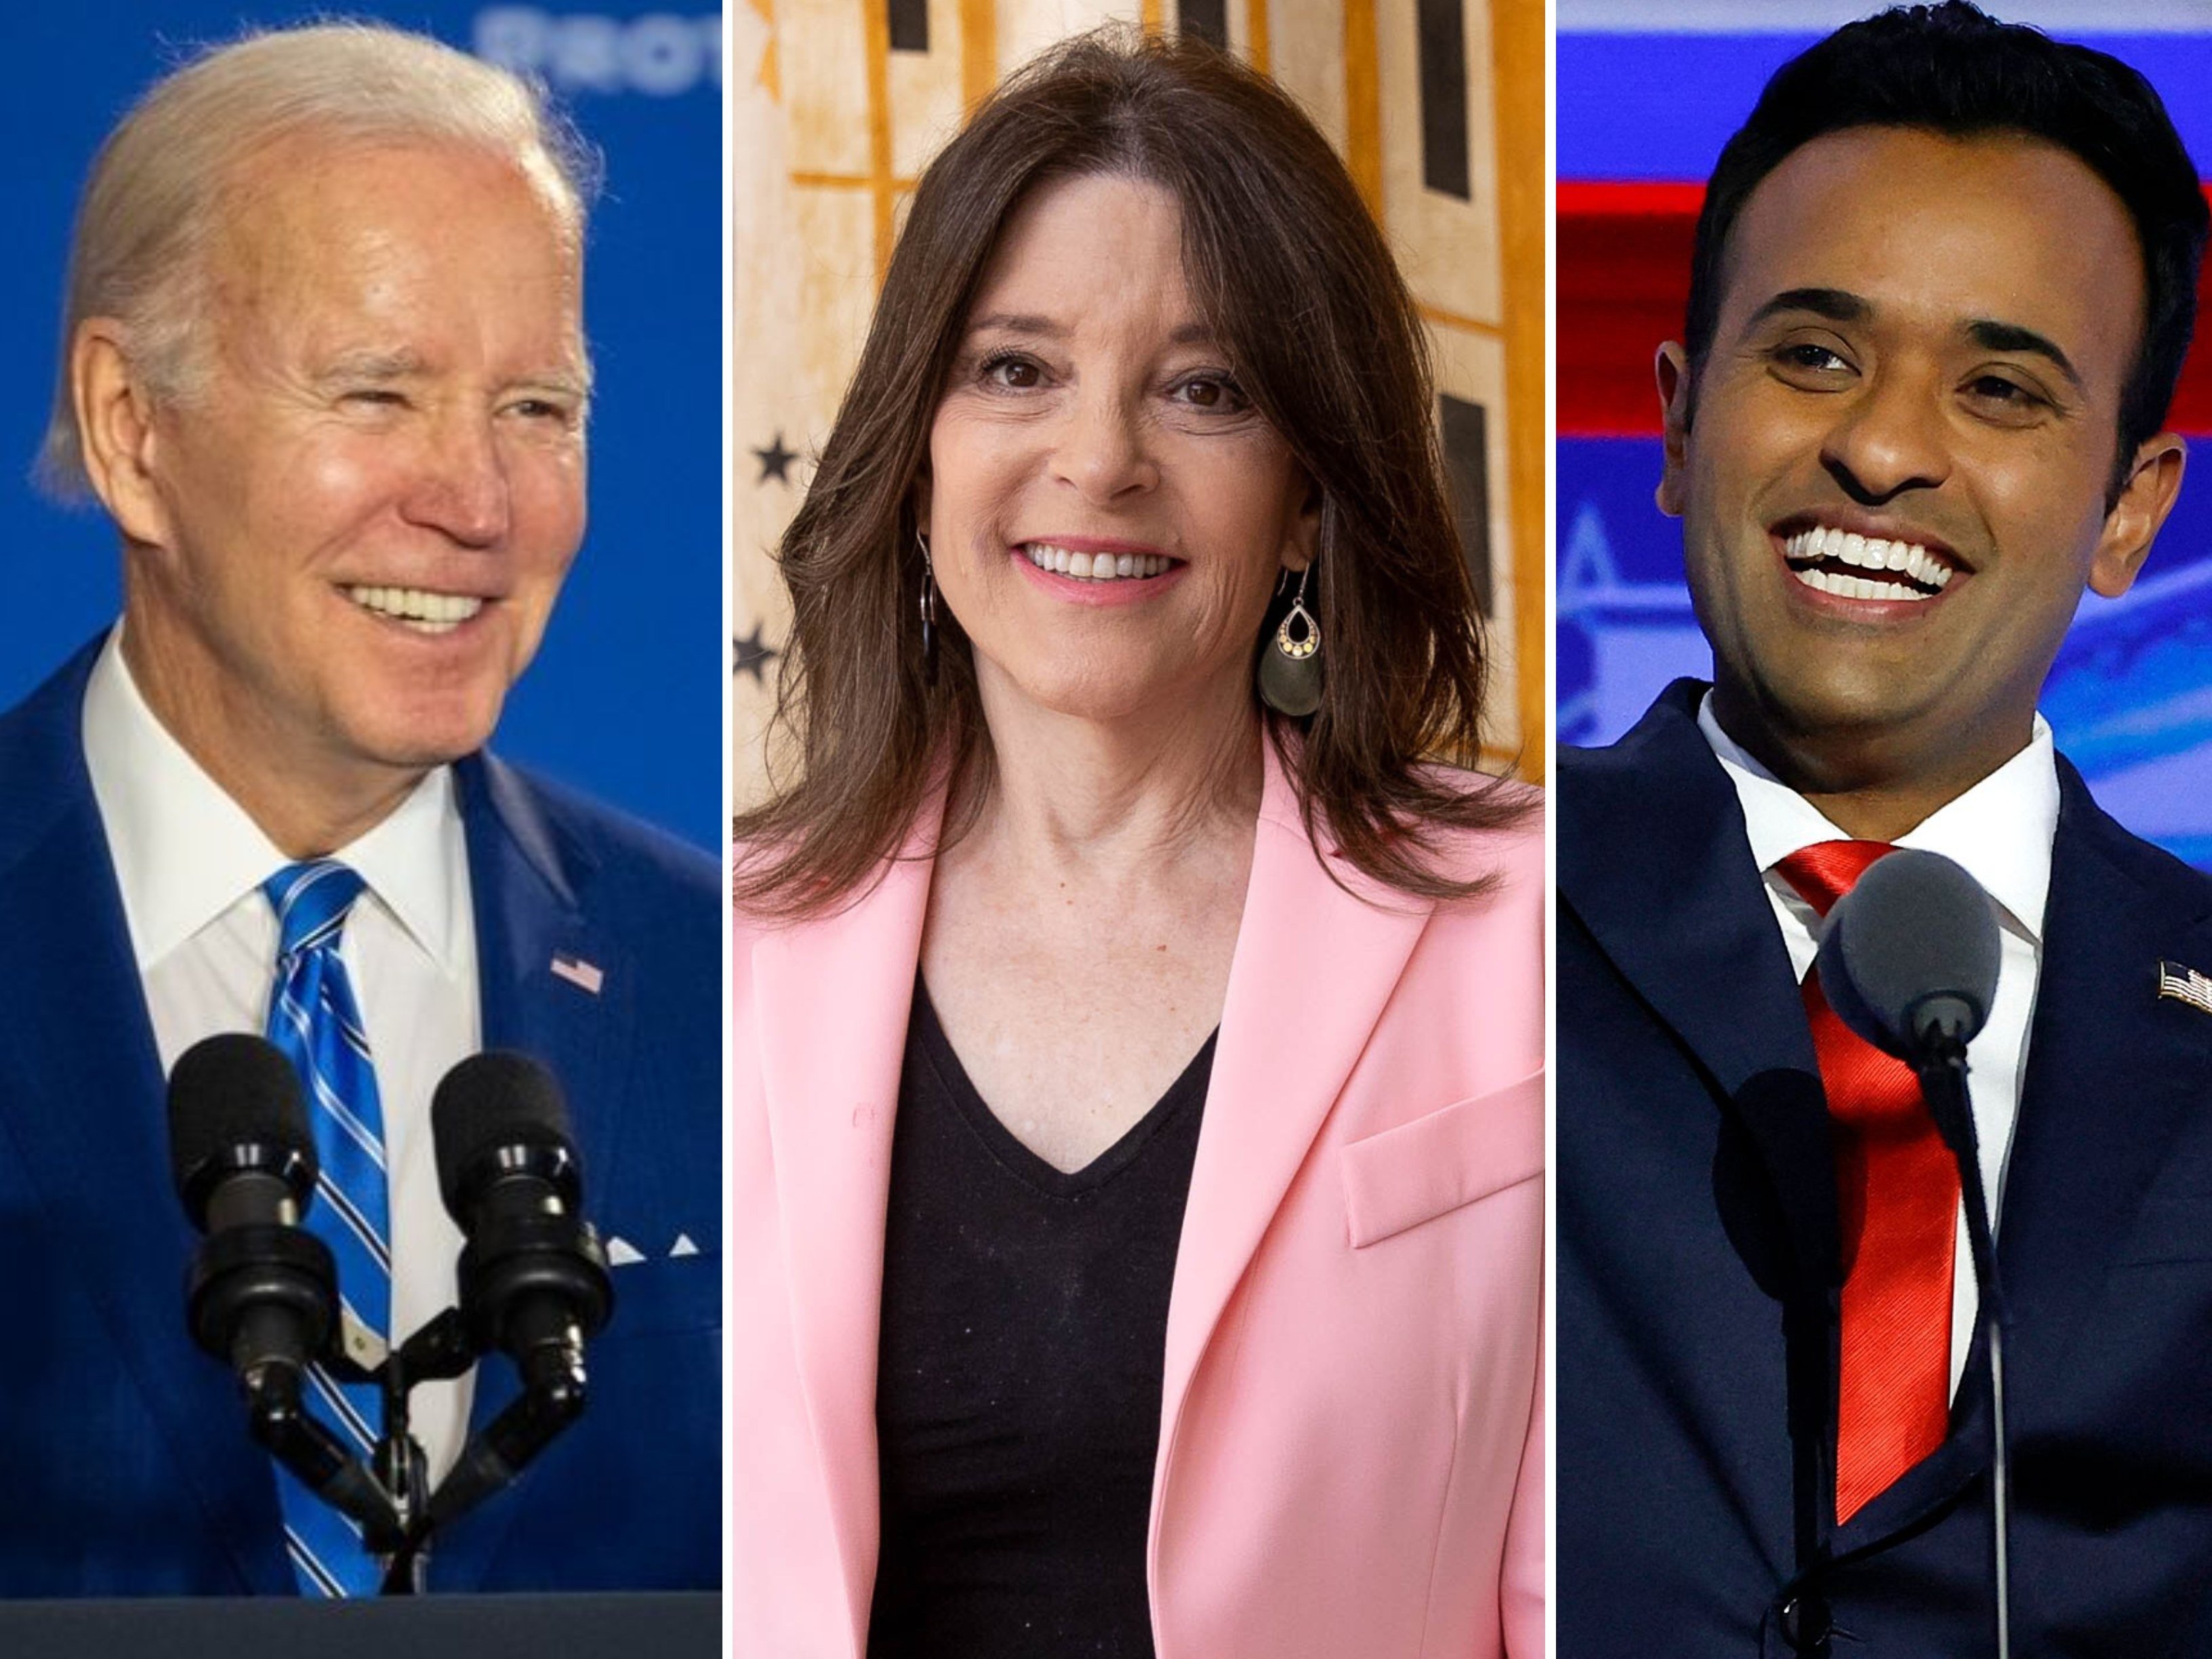 Presidential hopefuls for the US 2024 elections (from left): Joe Biden, Marianne Williamson and Vivek Ramasamy. Photos: @joebiden/Instagram, Getty Images, AFP